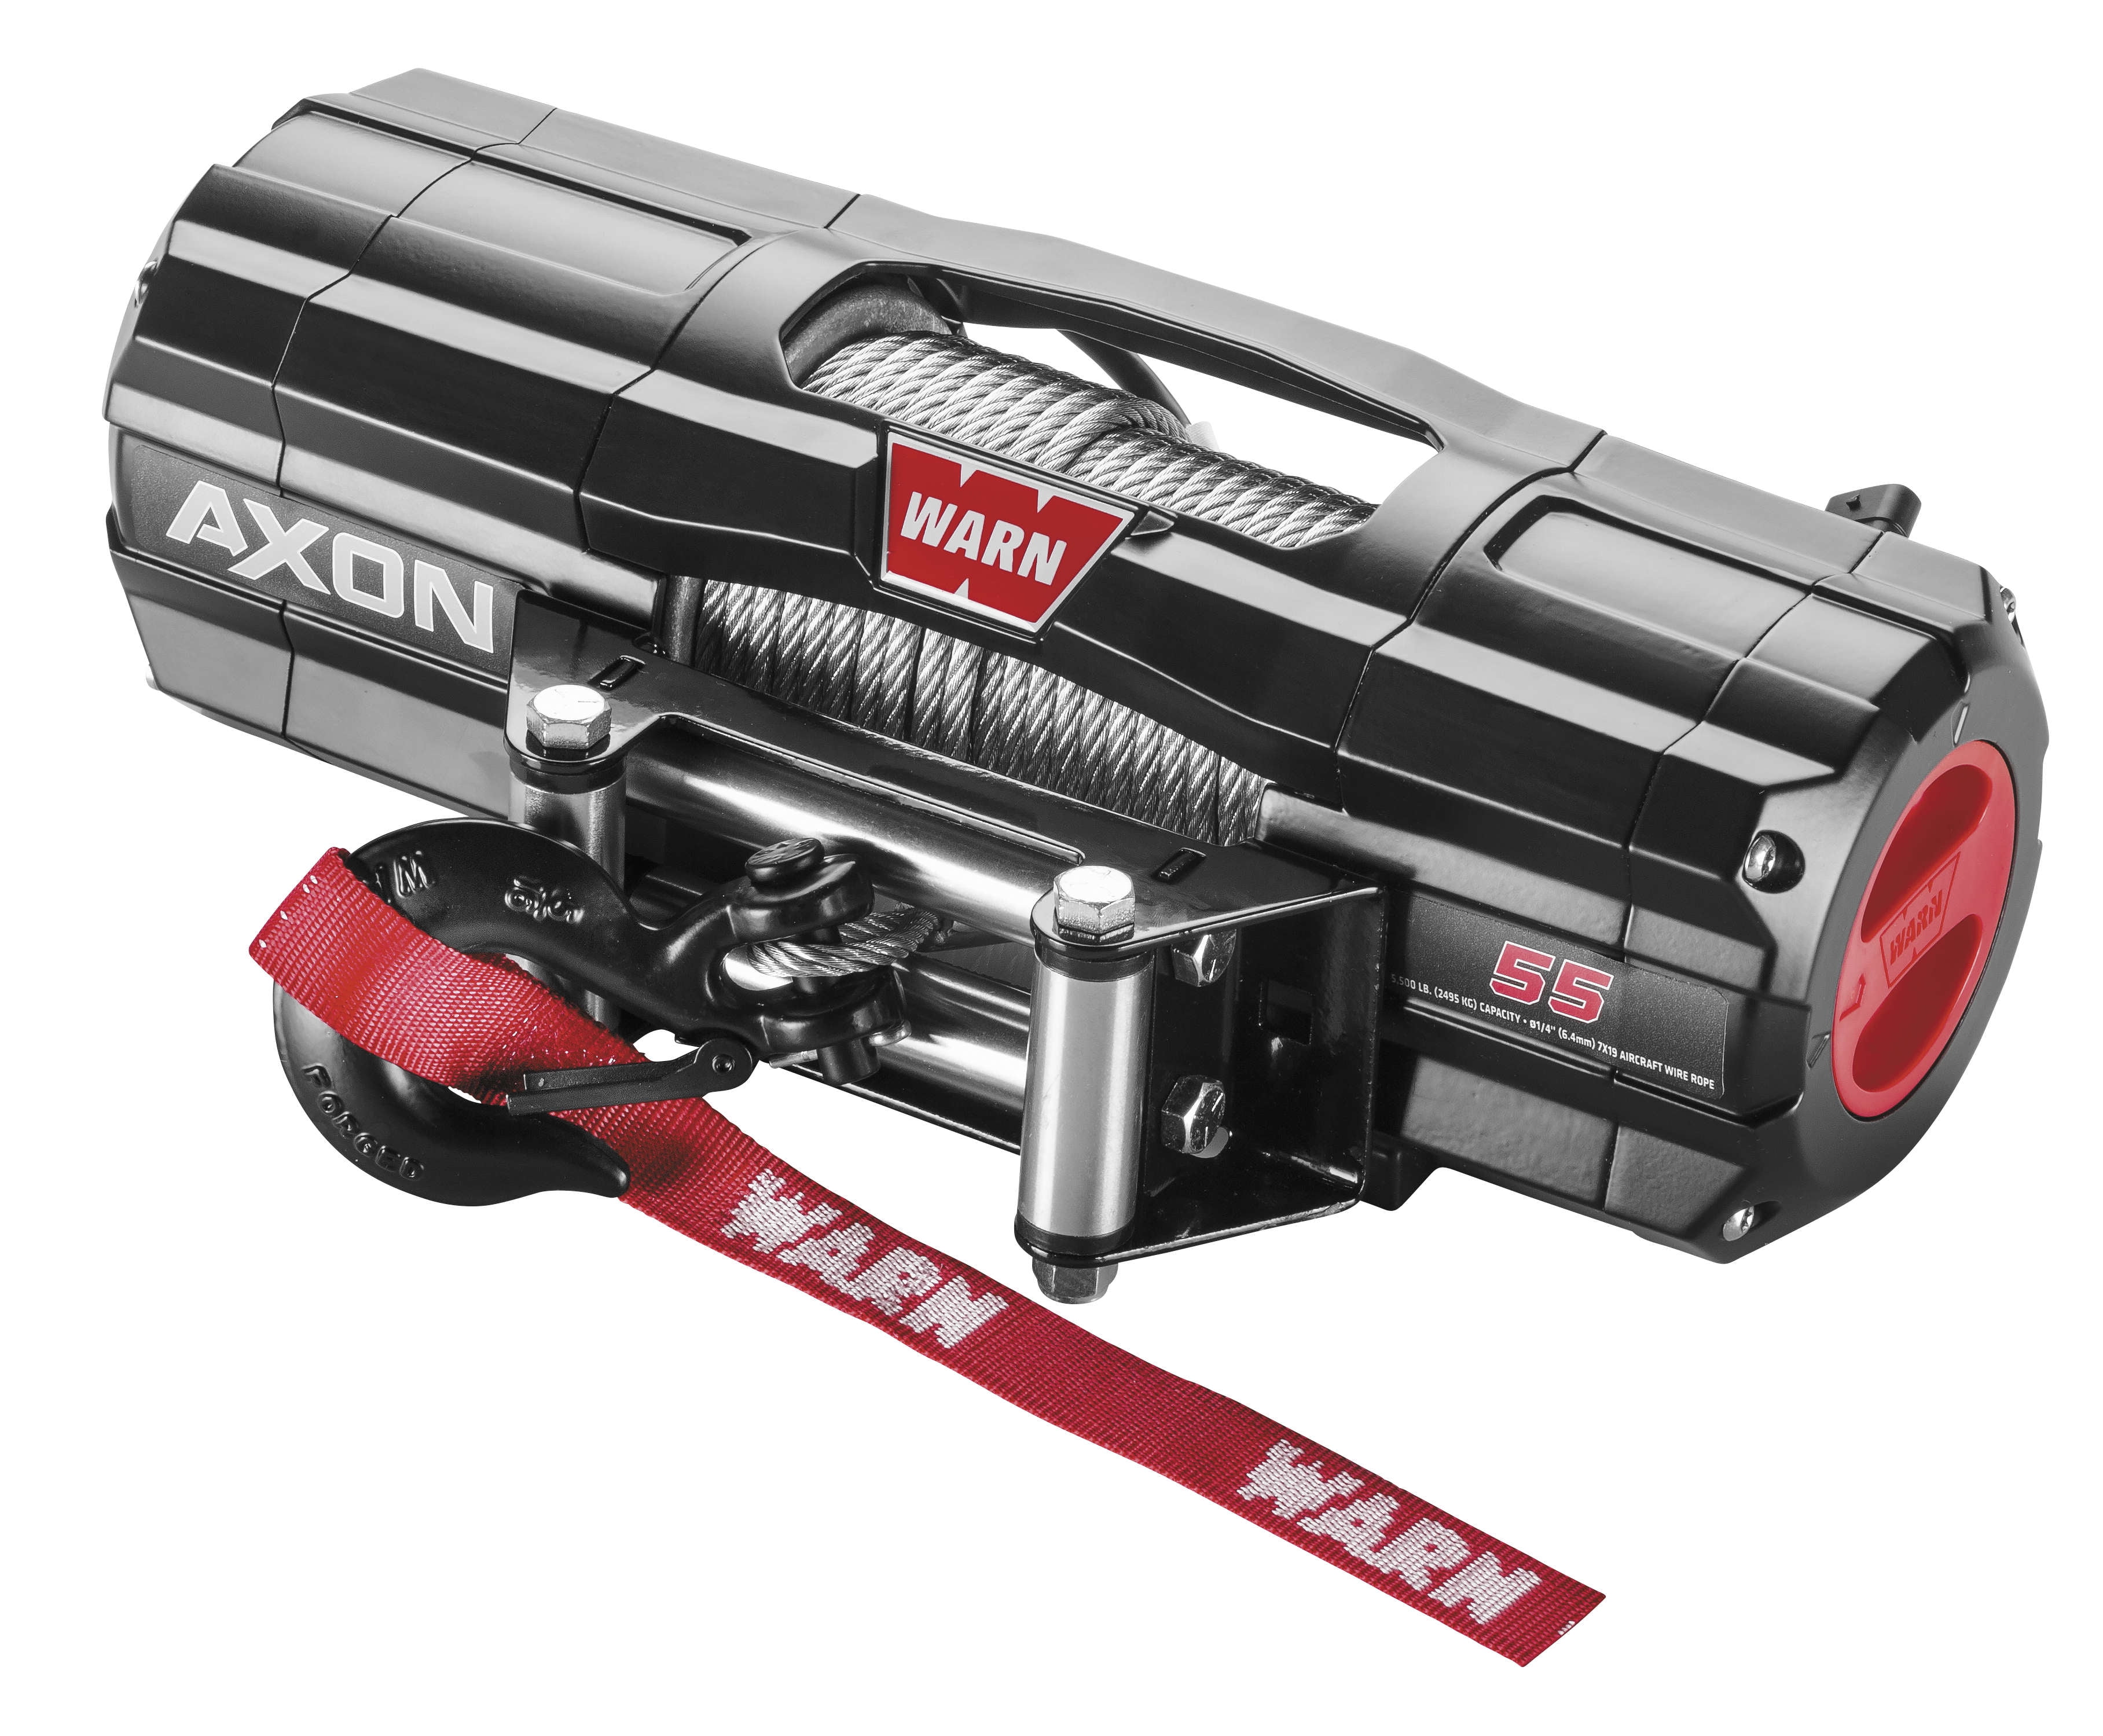 Capacity 8000 lb Warn 89305 ZEON 8-S Winch with Synthetic Rope 